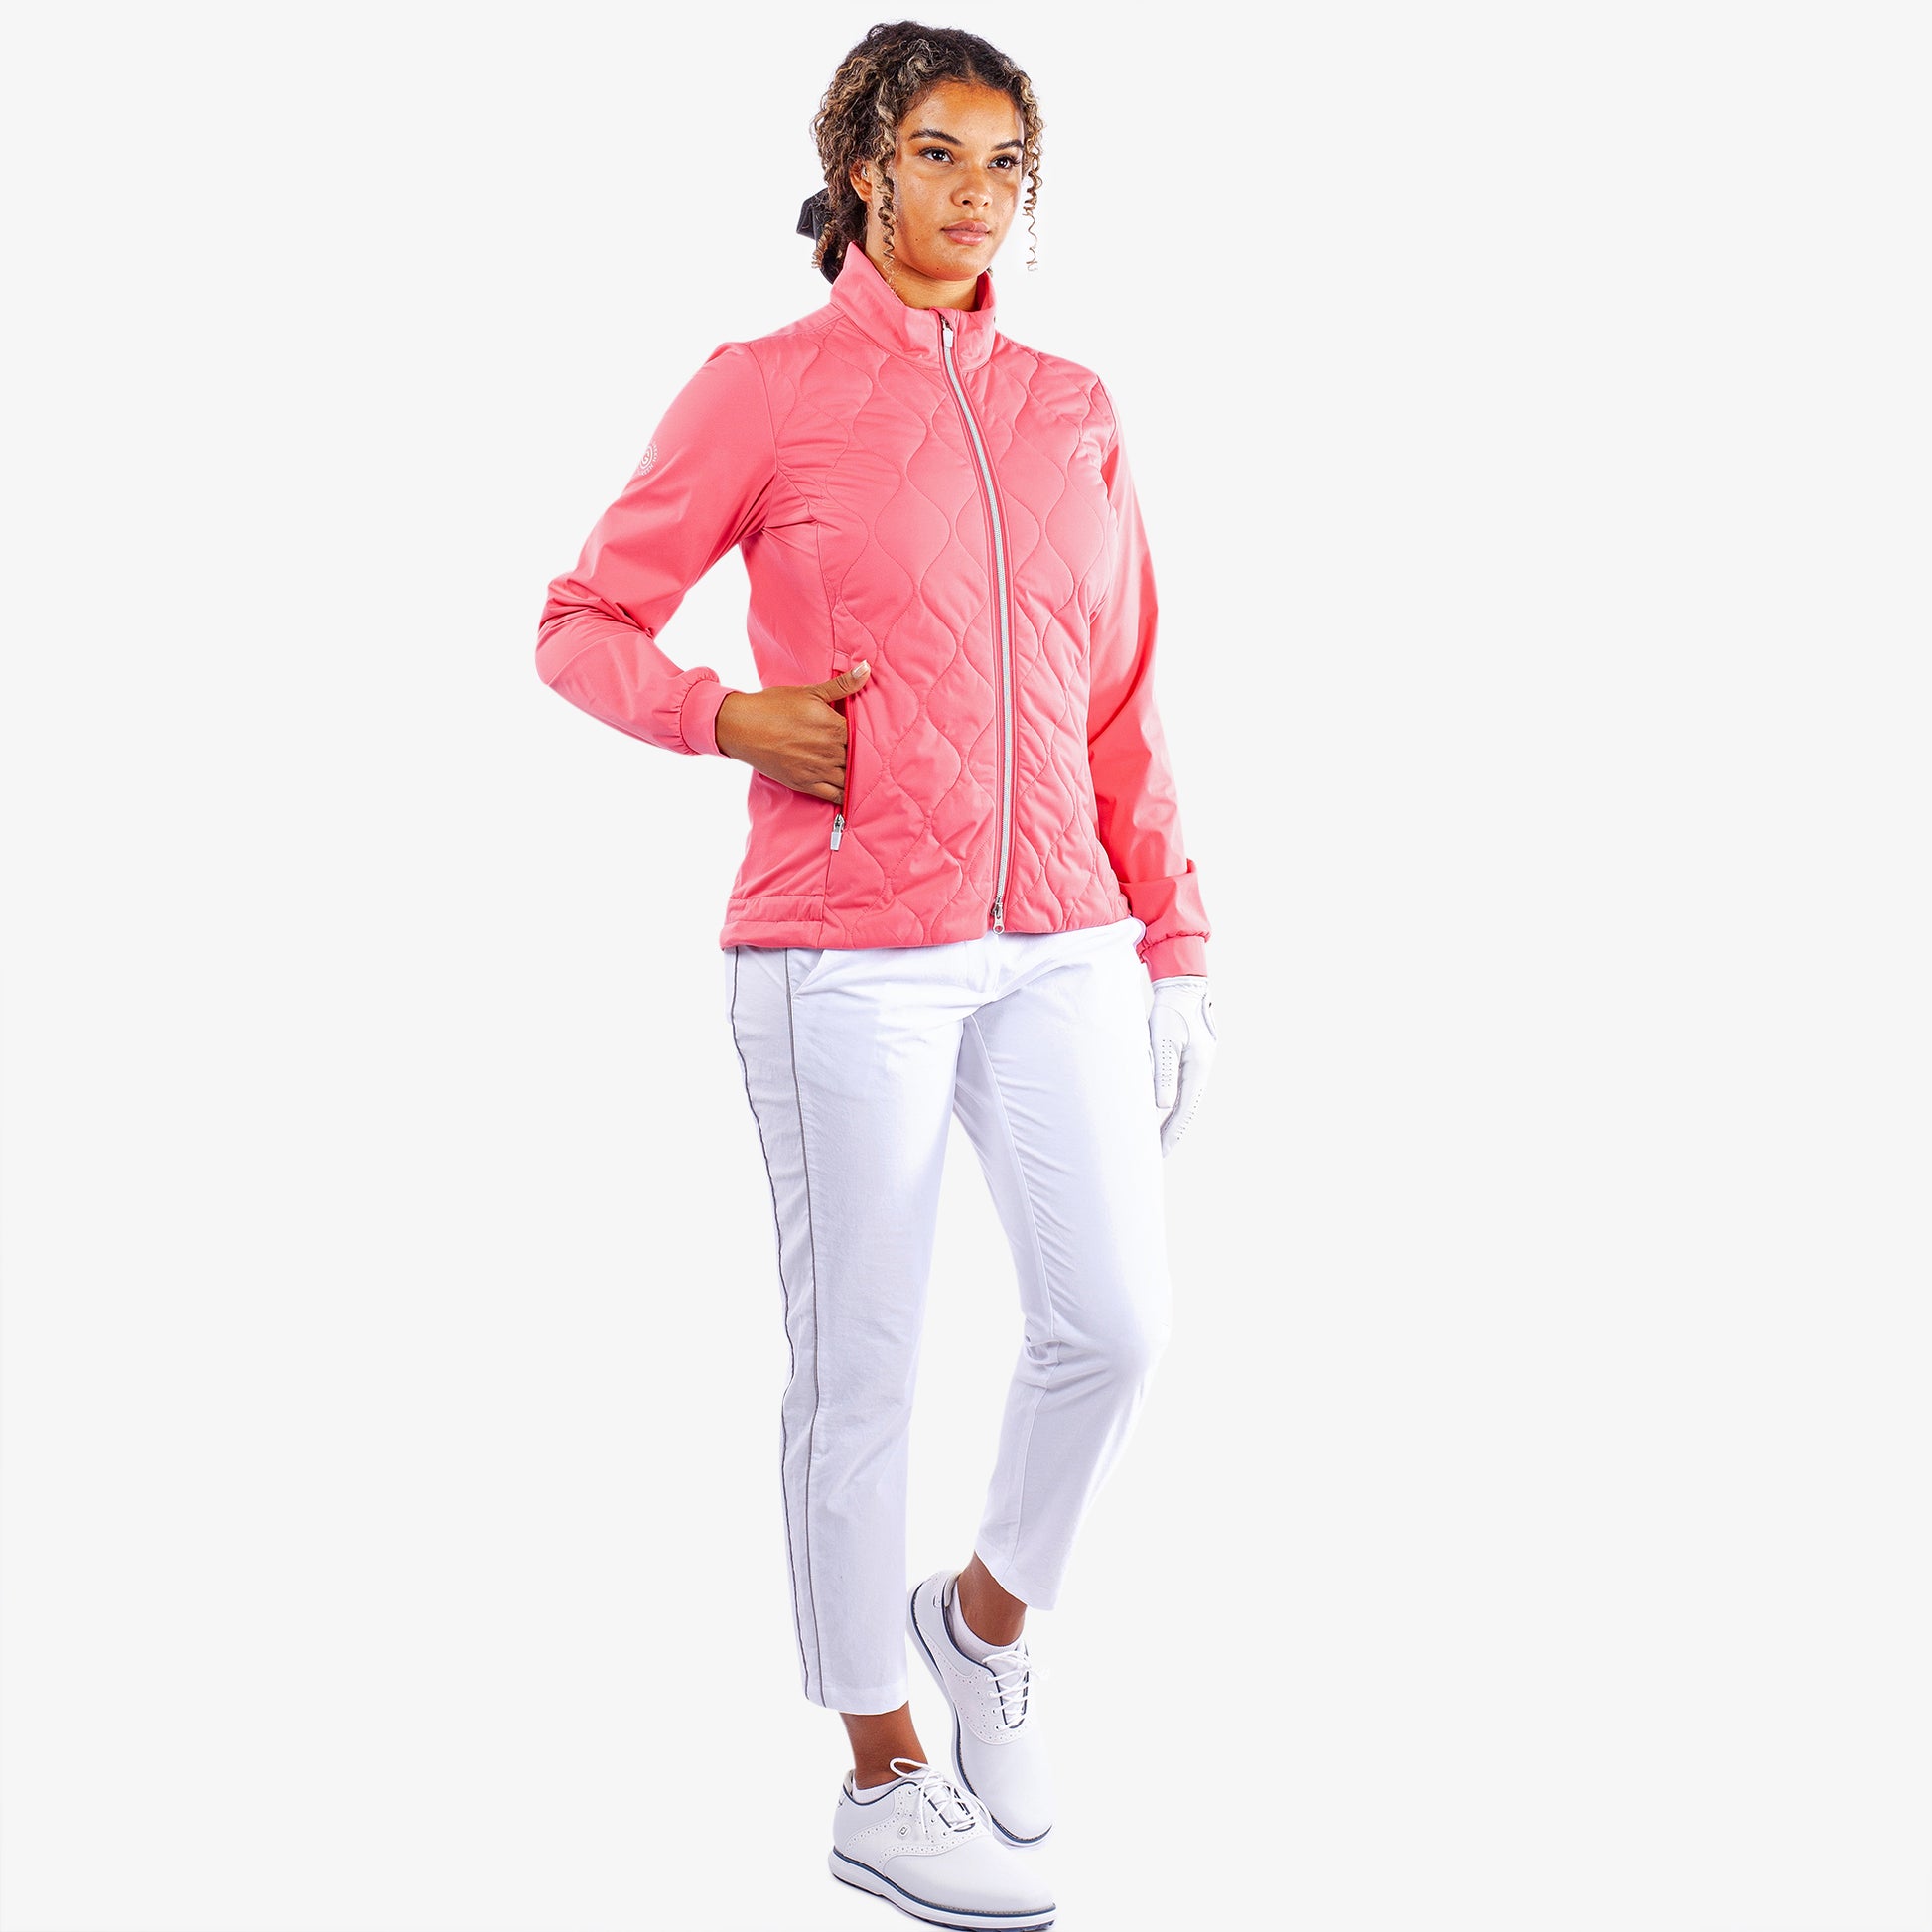 Galvin Green Ladies Quilted INTERFACE Jacket in Camelia Rose